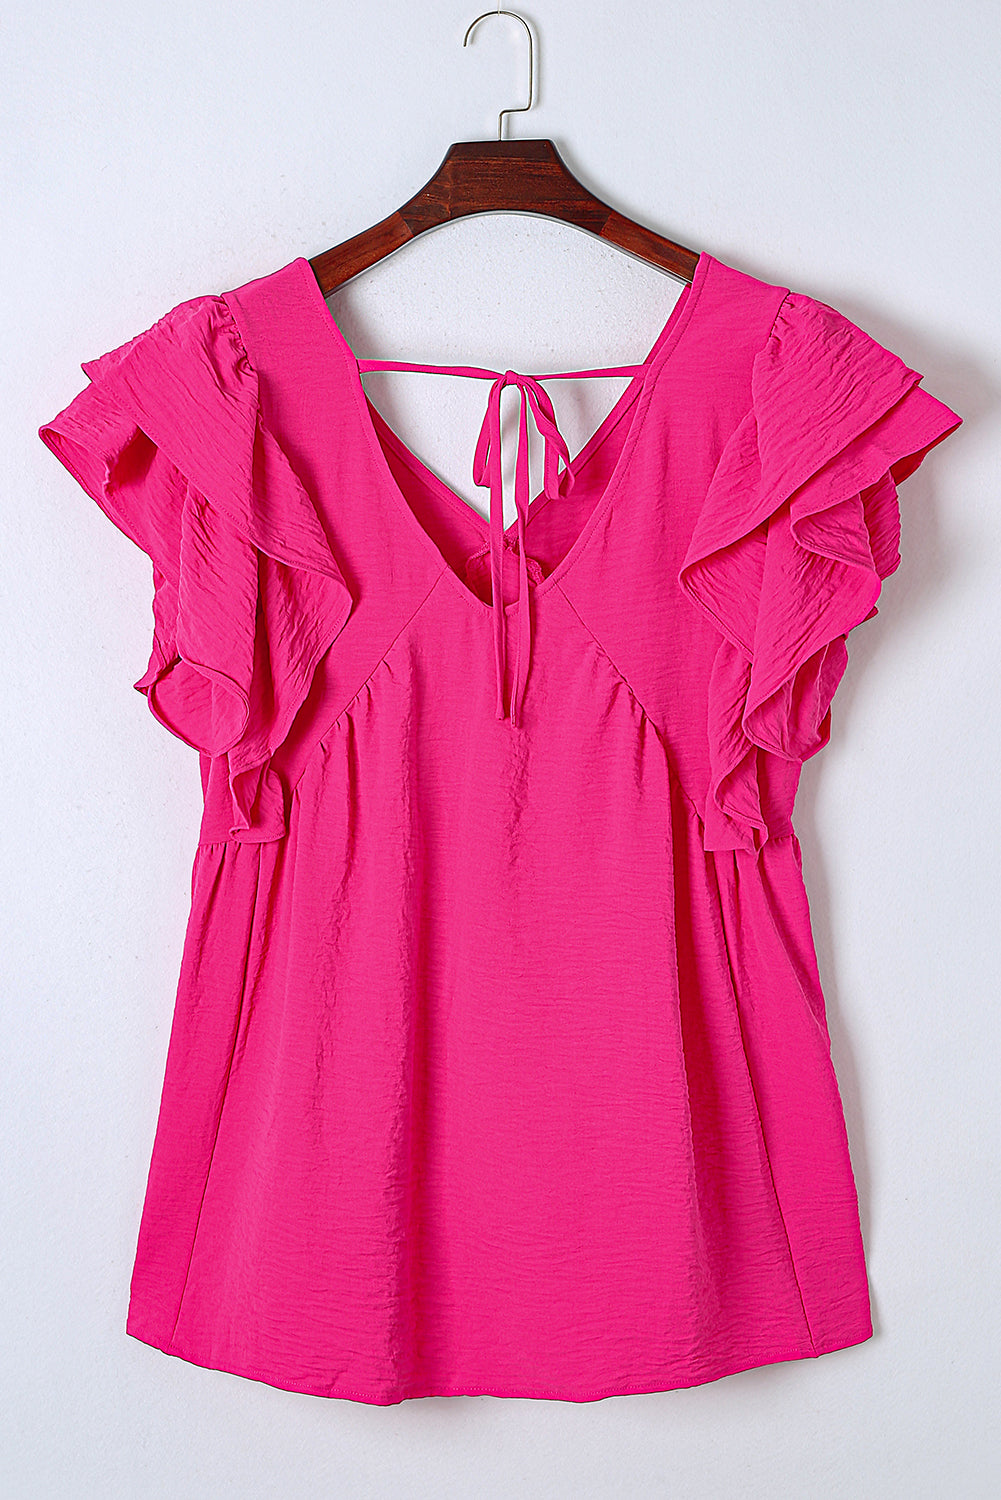 Pink Crinkle V Neck Tie Back Ruffle Plus Size Top